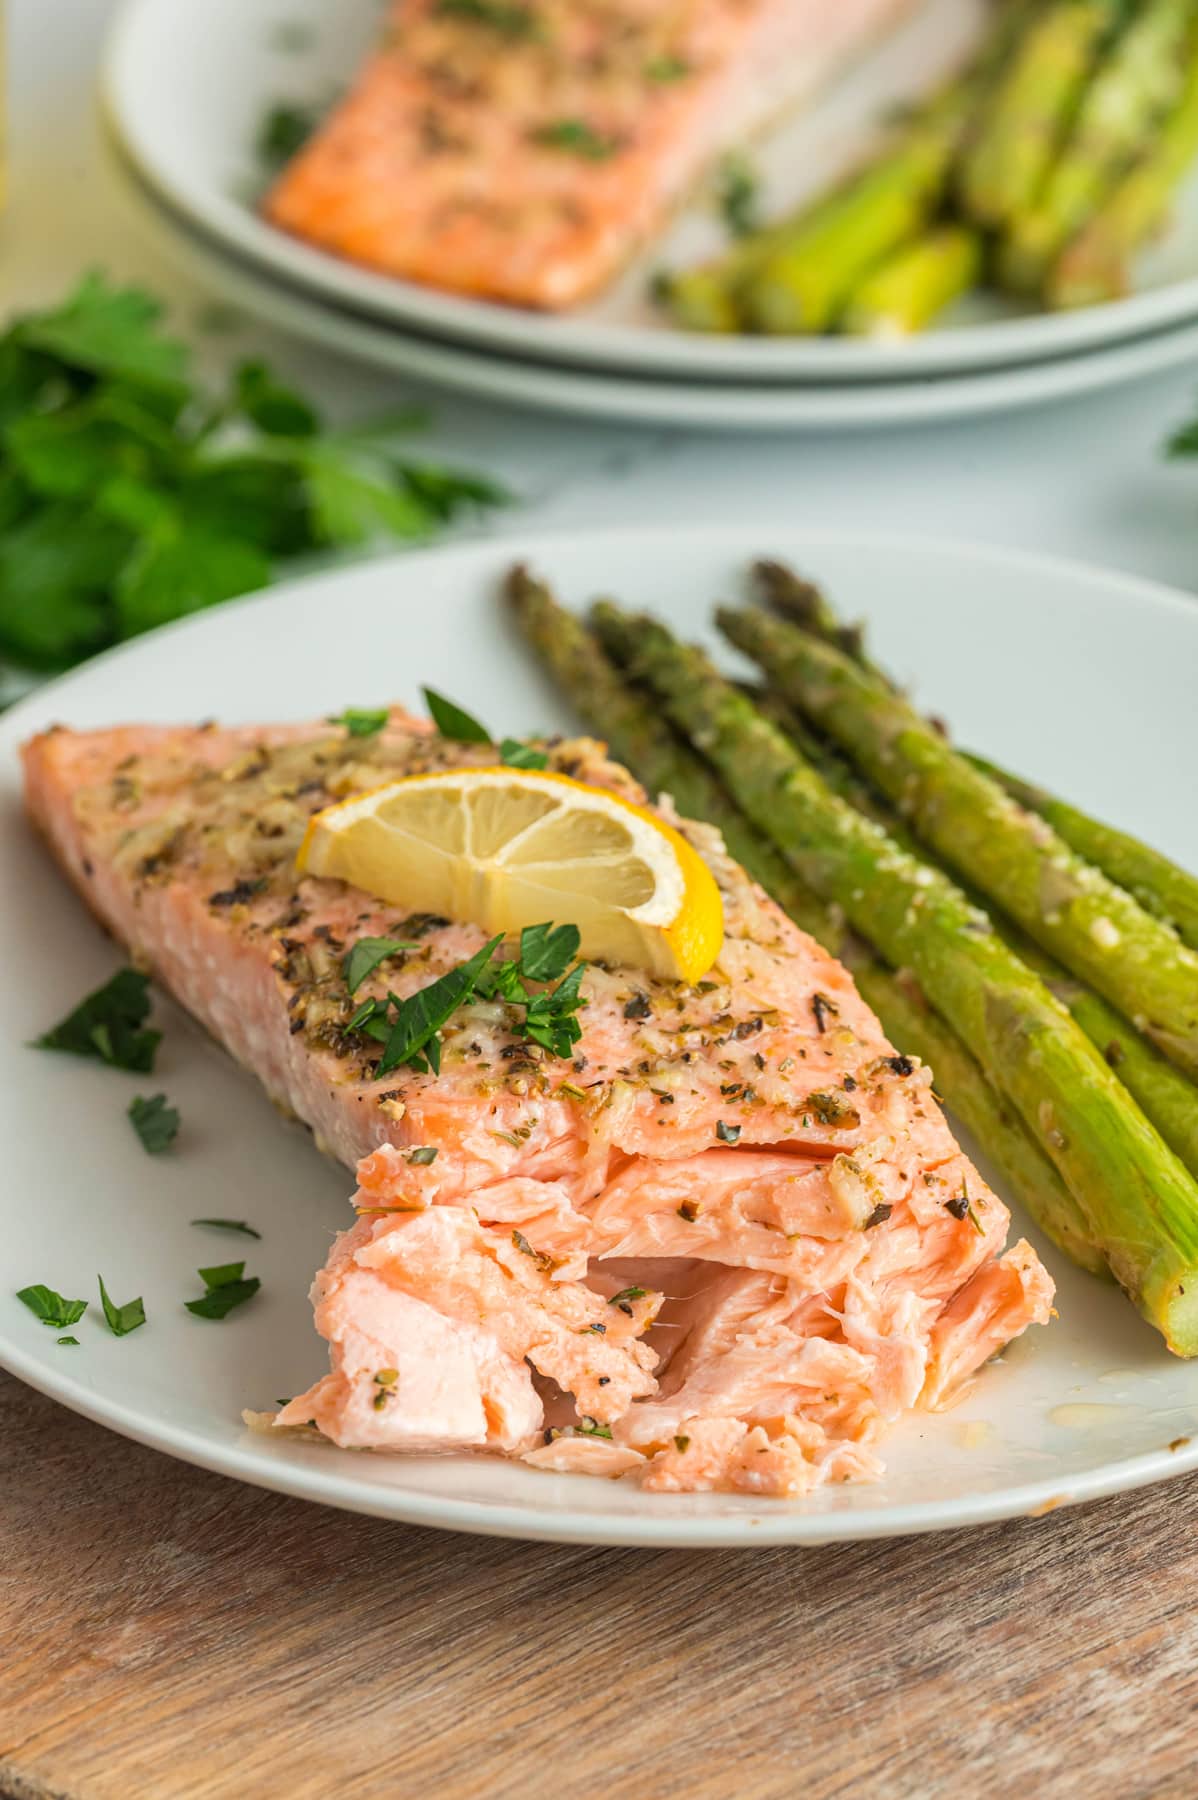 An oven baked salmon filet on a white plate with asparagus